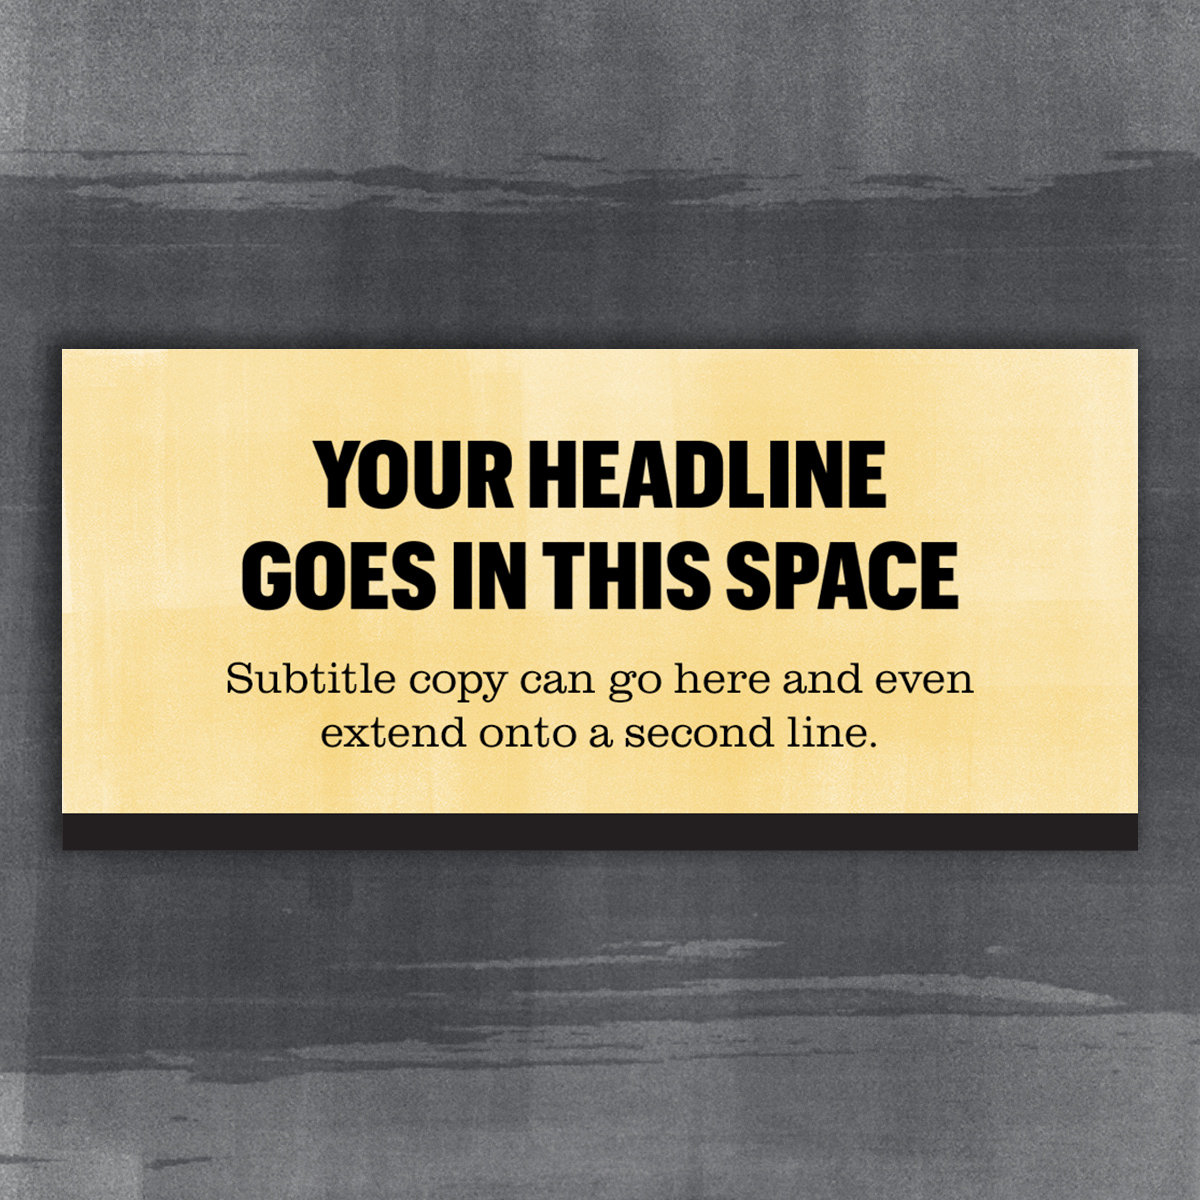 Email Header Mock-up. Gold Texture Background and black text